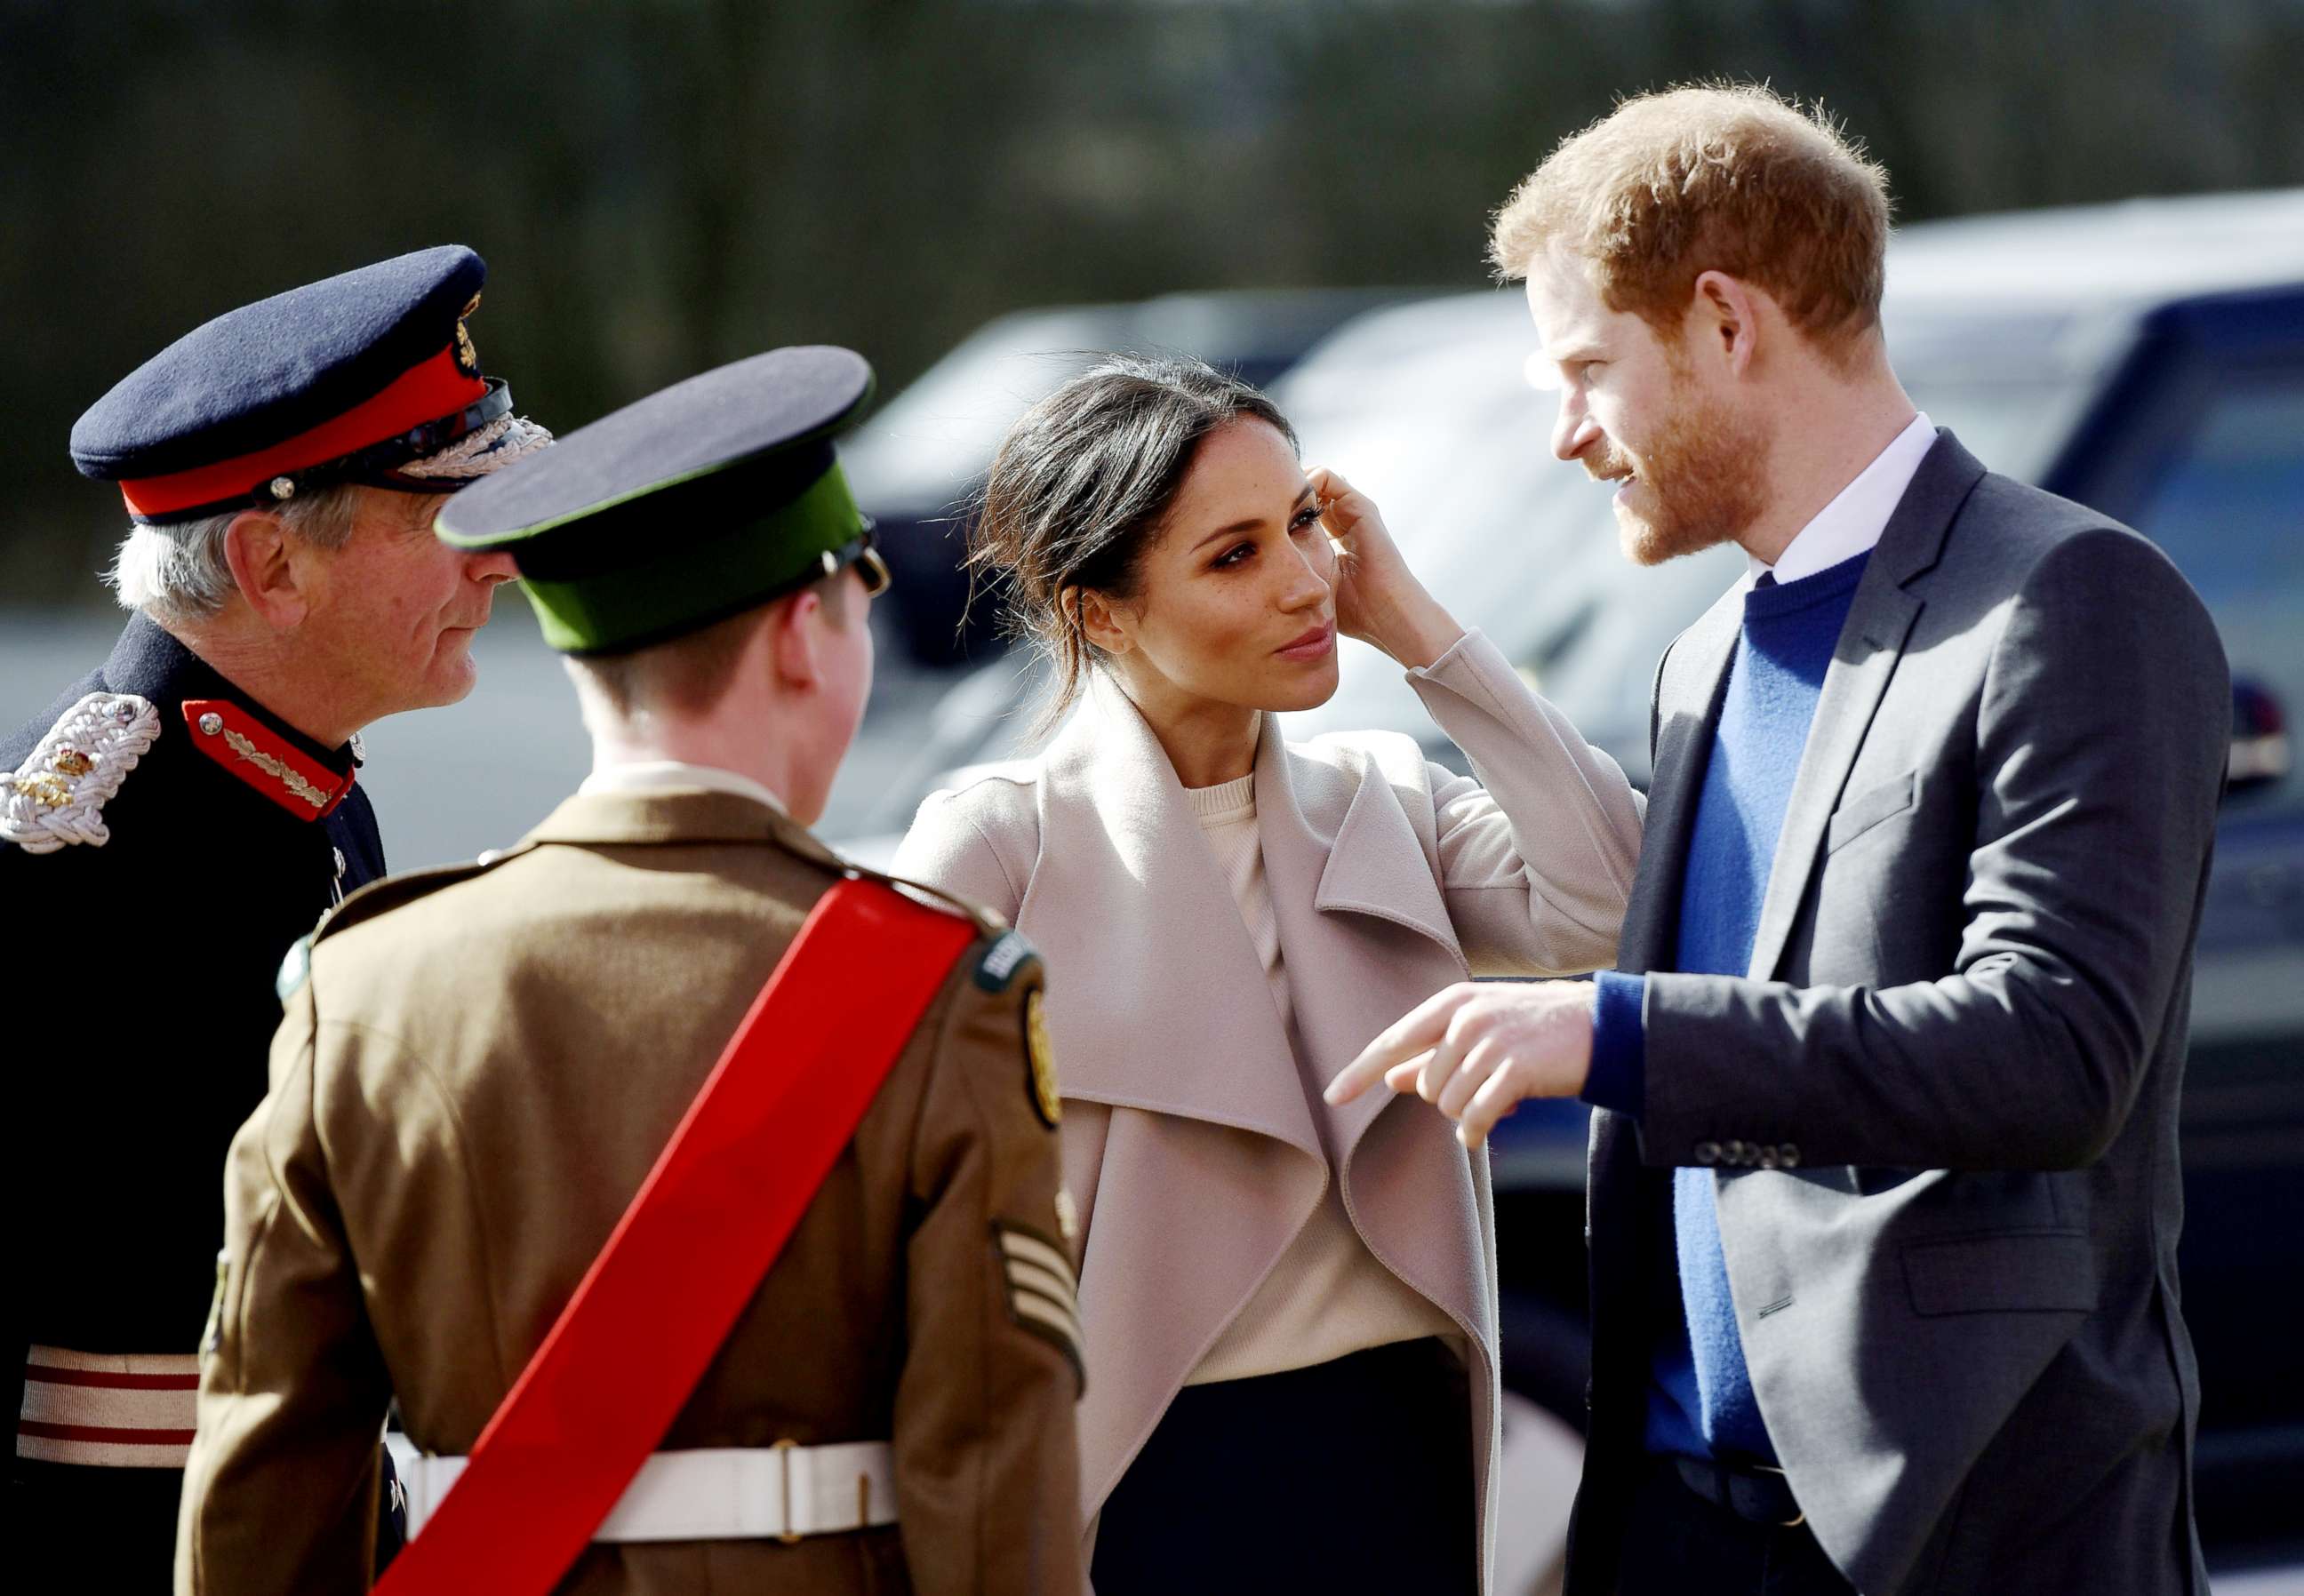 PHOTO: Meghan Markle and Prince Harry visit the Eikon Centre and attend an event to mark the second year of the youth-led peace-building initiative 'Amazing the Space', March 23, 2018, in Lisburn, Northern Ireland.